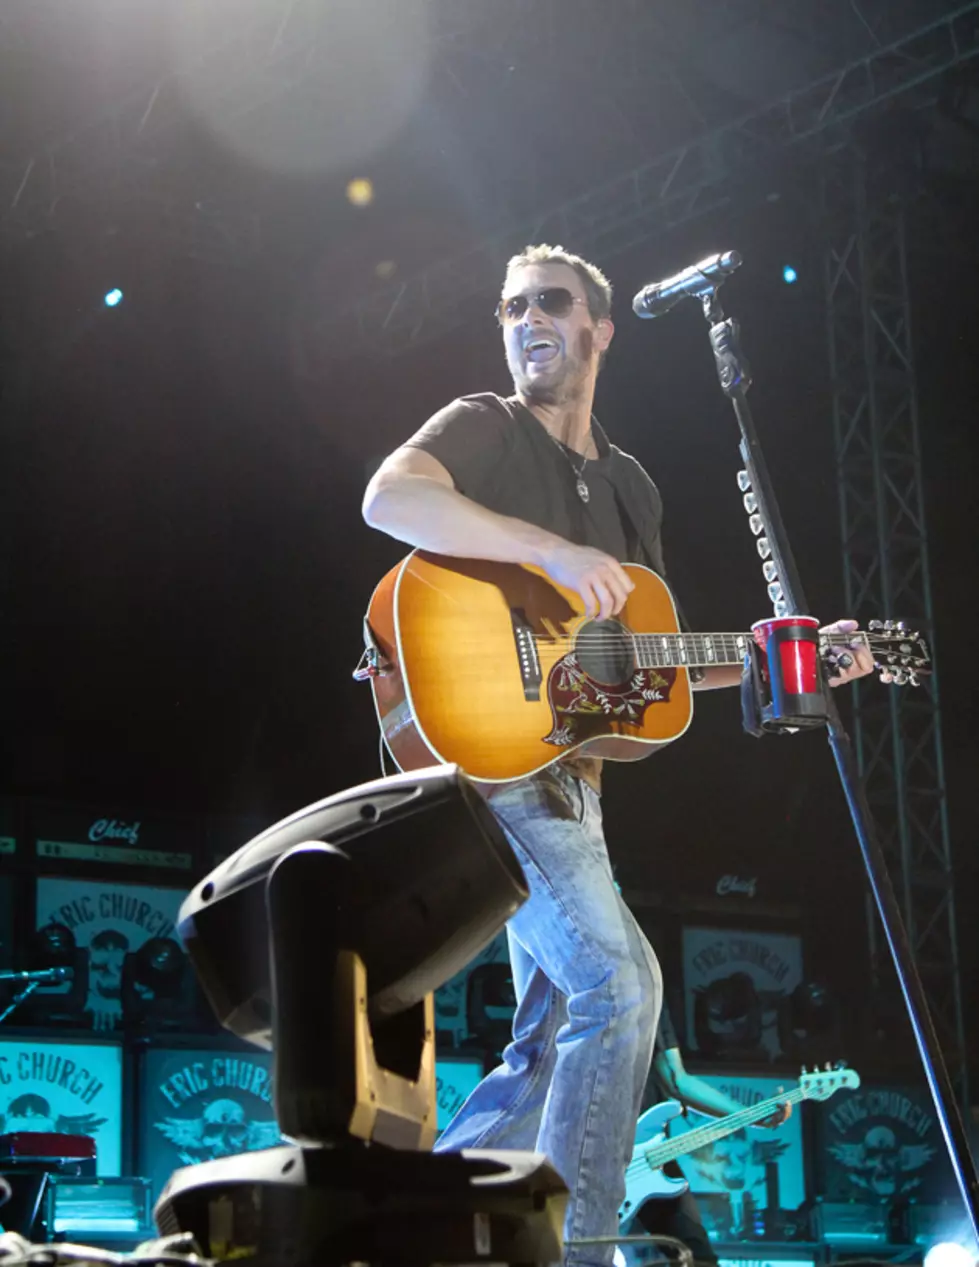 Tips for Attending the Eric Church Concert in Sioux Falls